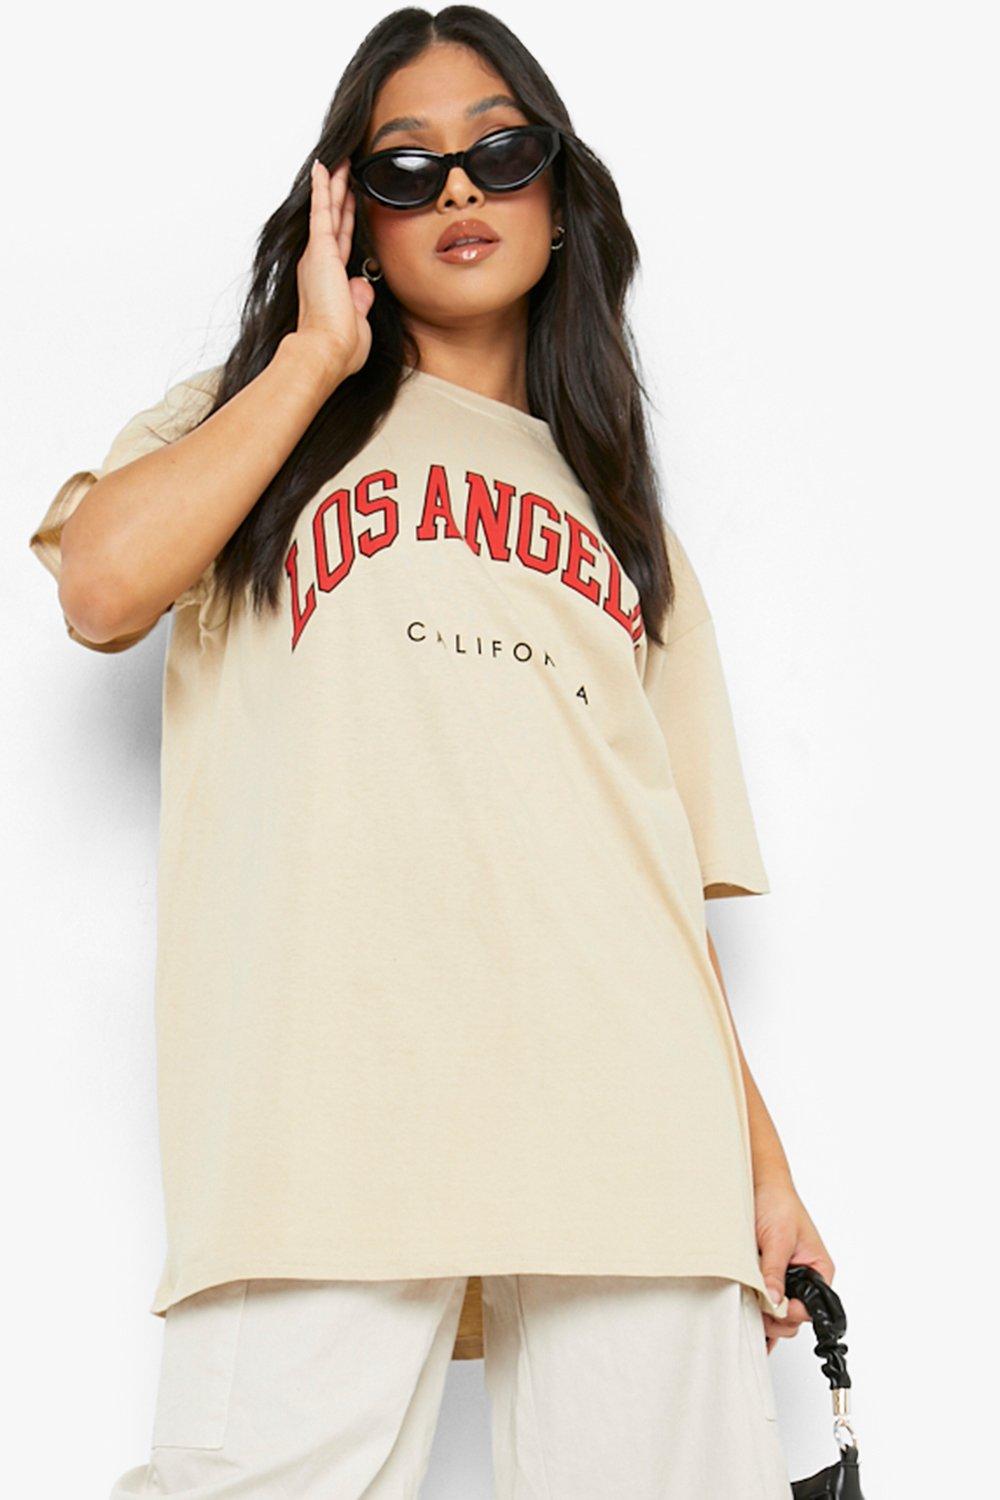 GLIGLITTR Women Vintage Oversized Tshirt Short Sleeve Summer Blouse Tops  Casual Loose Fit Atlanta Baseball Letter Graphic Tees(Apricot2,Small)  Apricot-13 at  Women's Clothing store